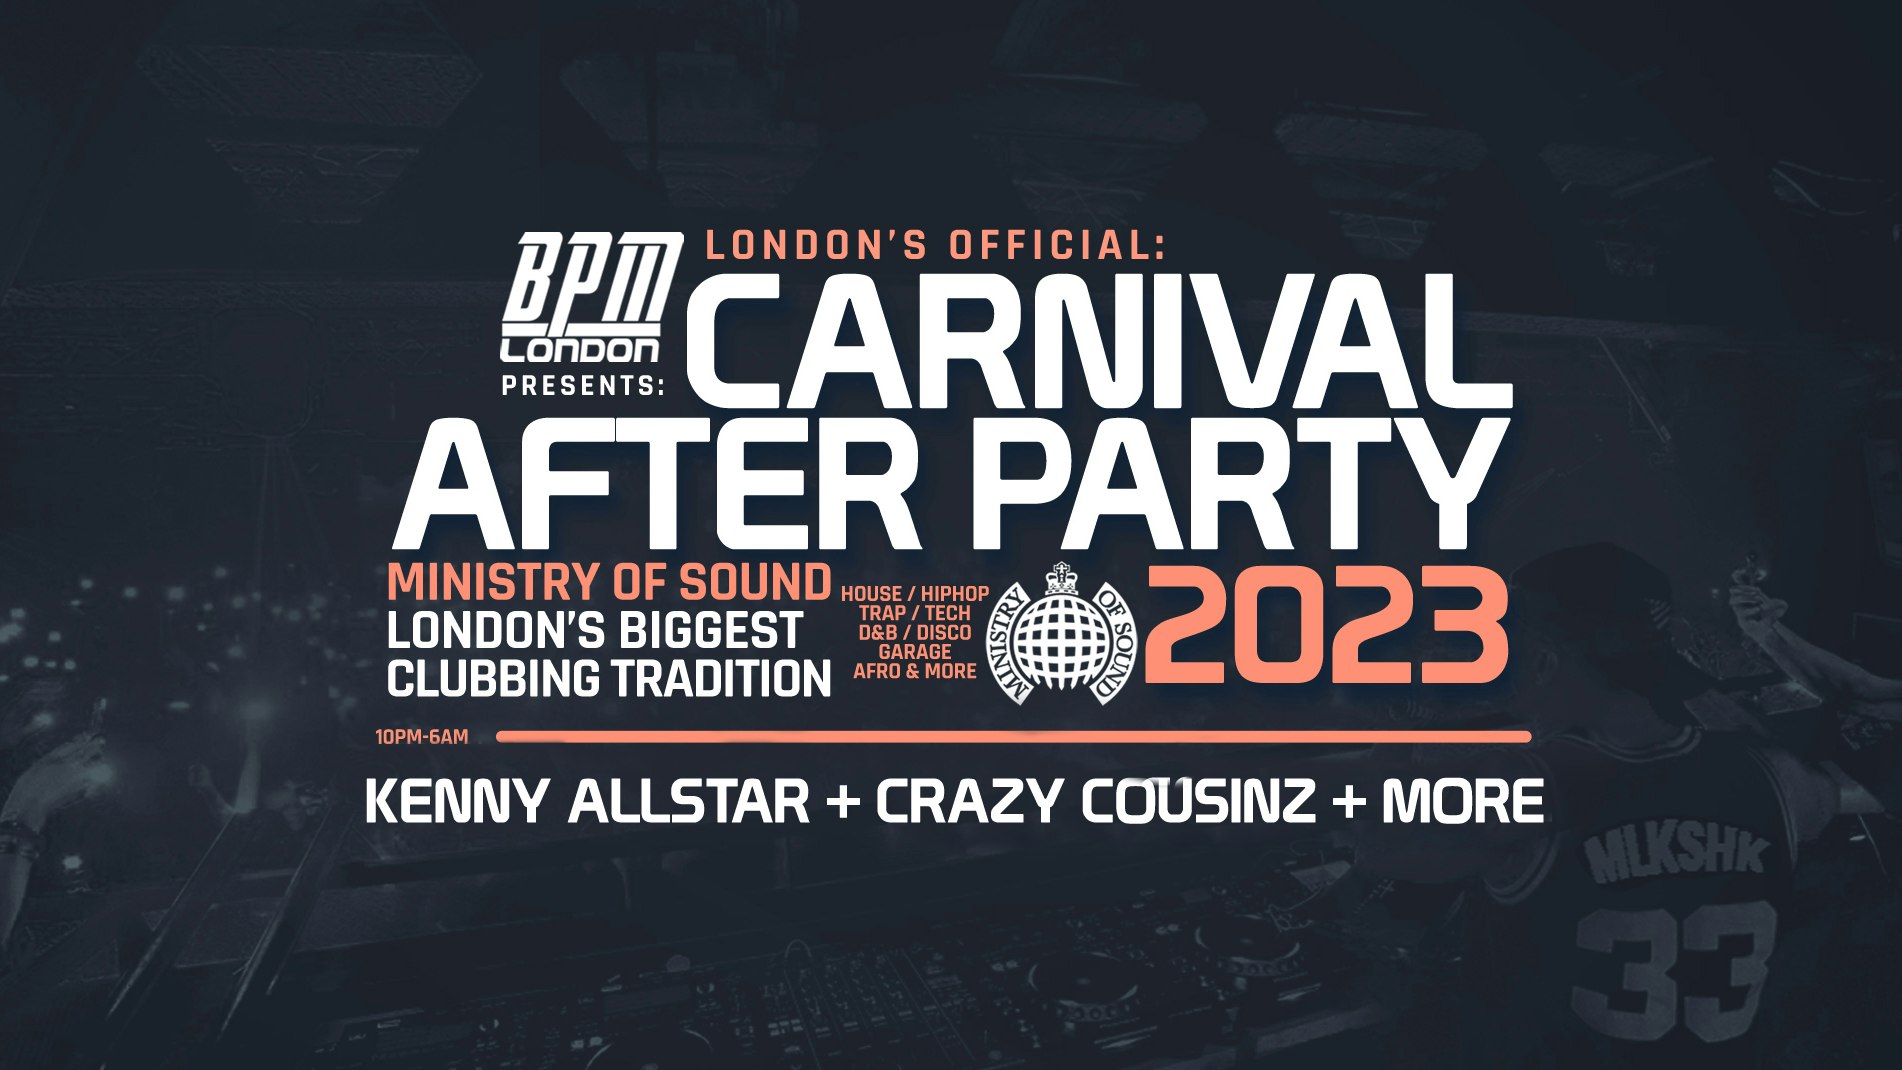 Ministry of Sound, Official Carnival After Party 2023 ft: Kenny Allstar + Crazy Cousinz 🔊